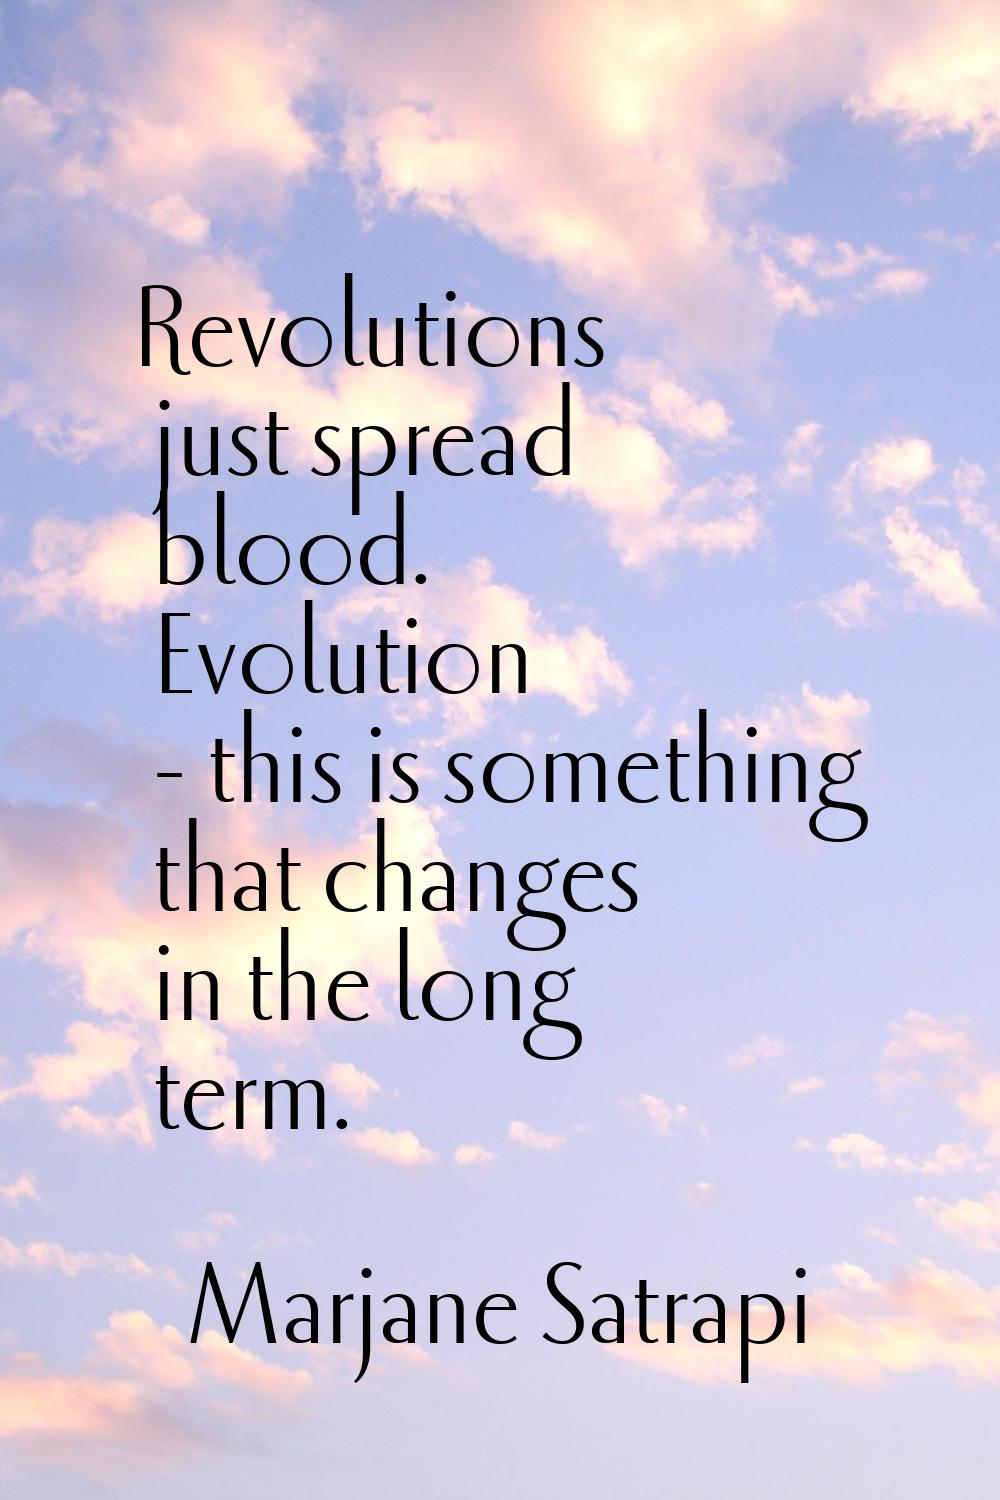 Revolutions just spread blood. Evolution - this is something that changes in the long term.